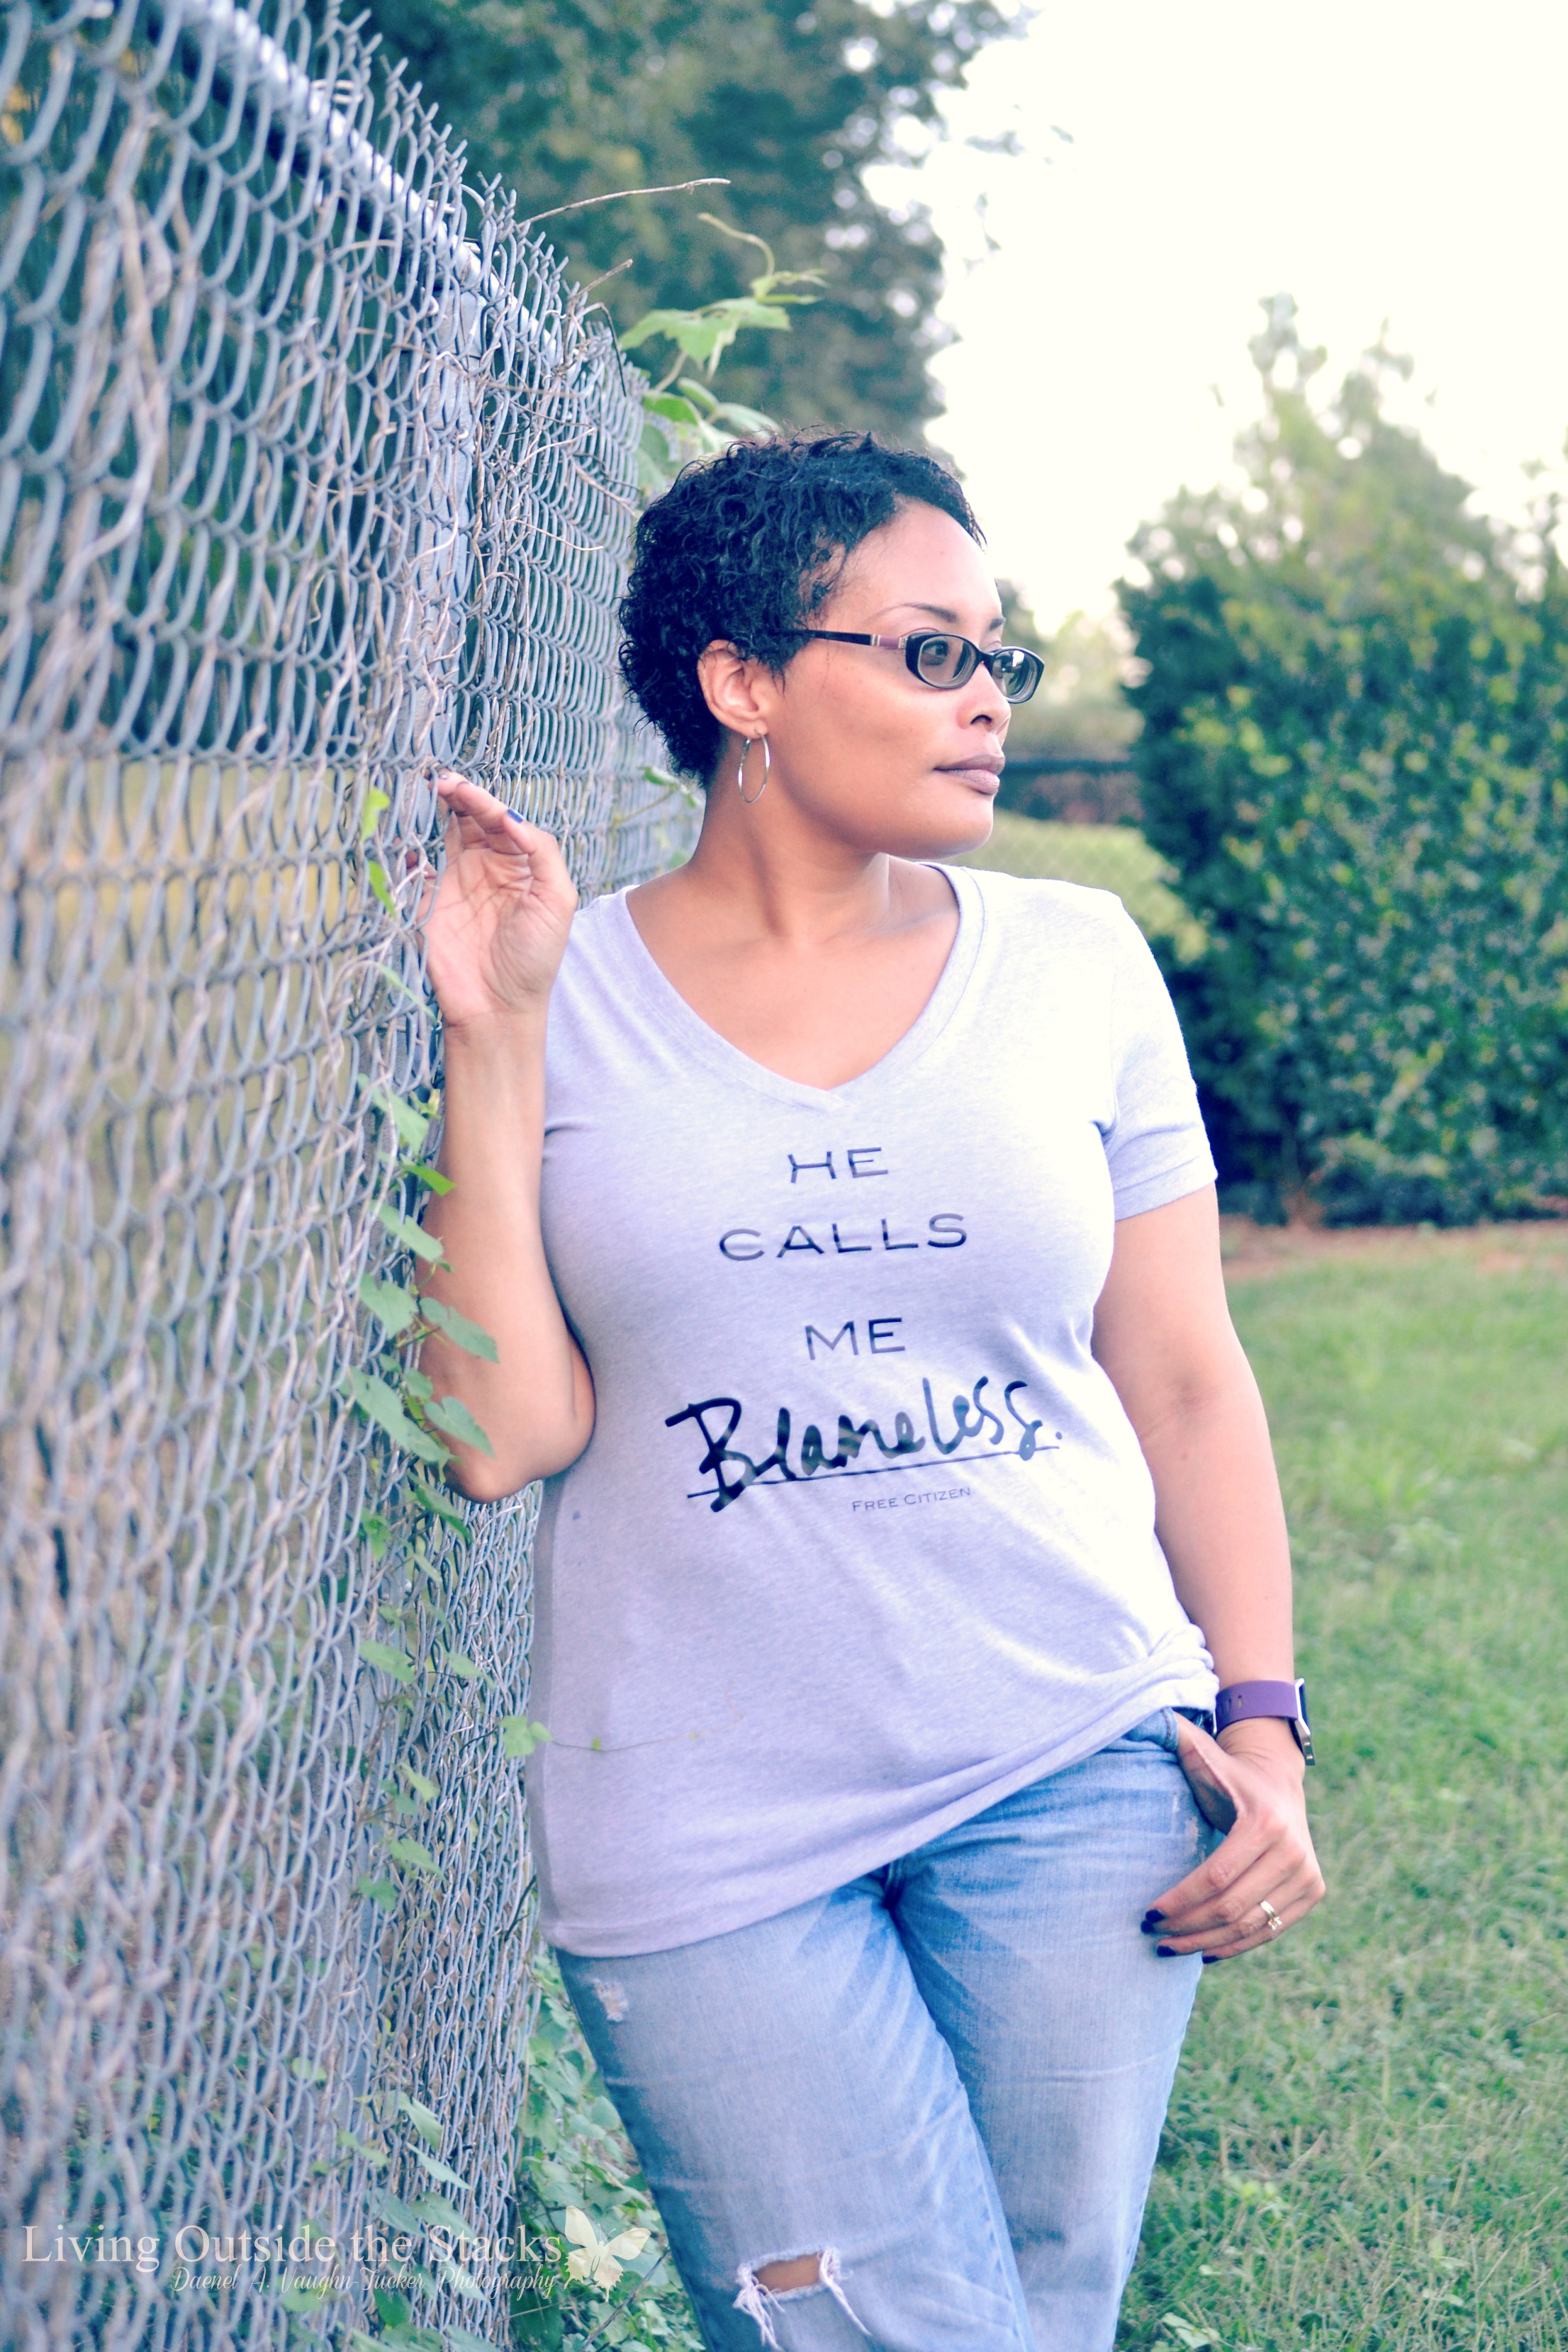  He Calls Me Tee by Free Citizen {living outside the stacks} #FreeCitizen #livefree #JesusGirl